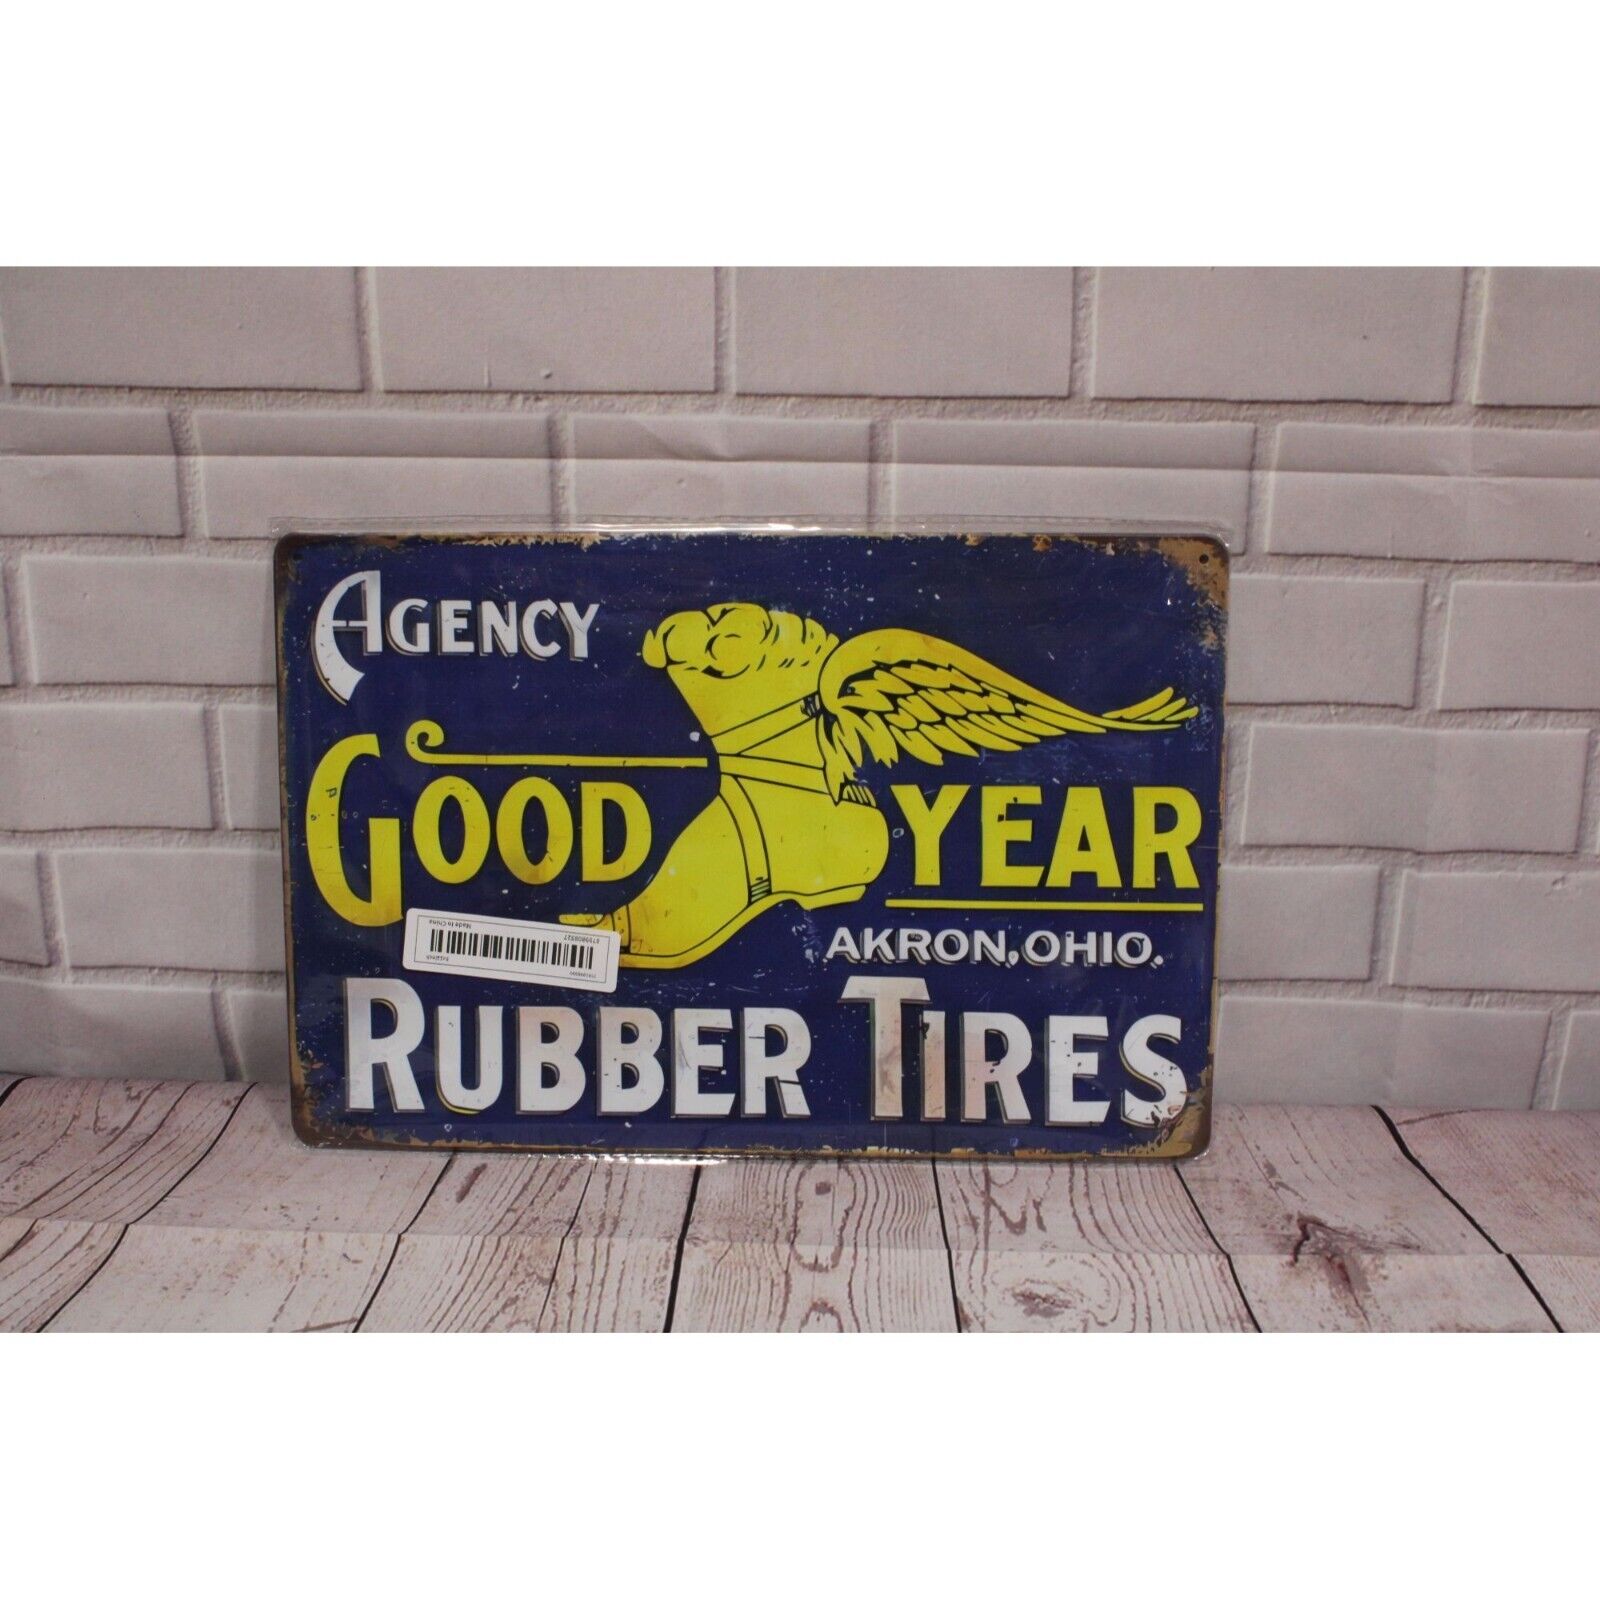 Vintage Style Goodyear Rubber Tires Metal Sign